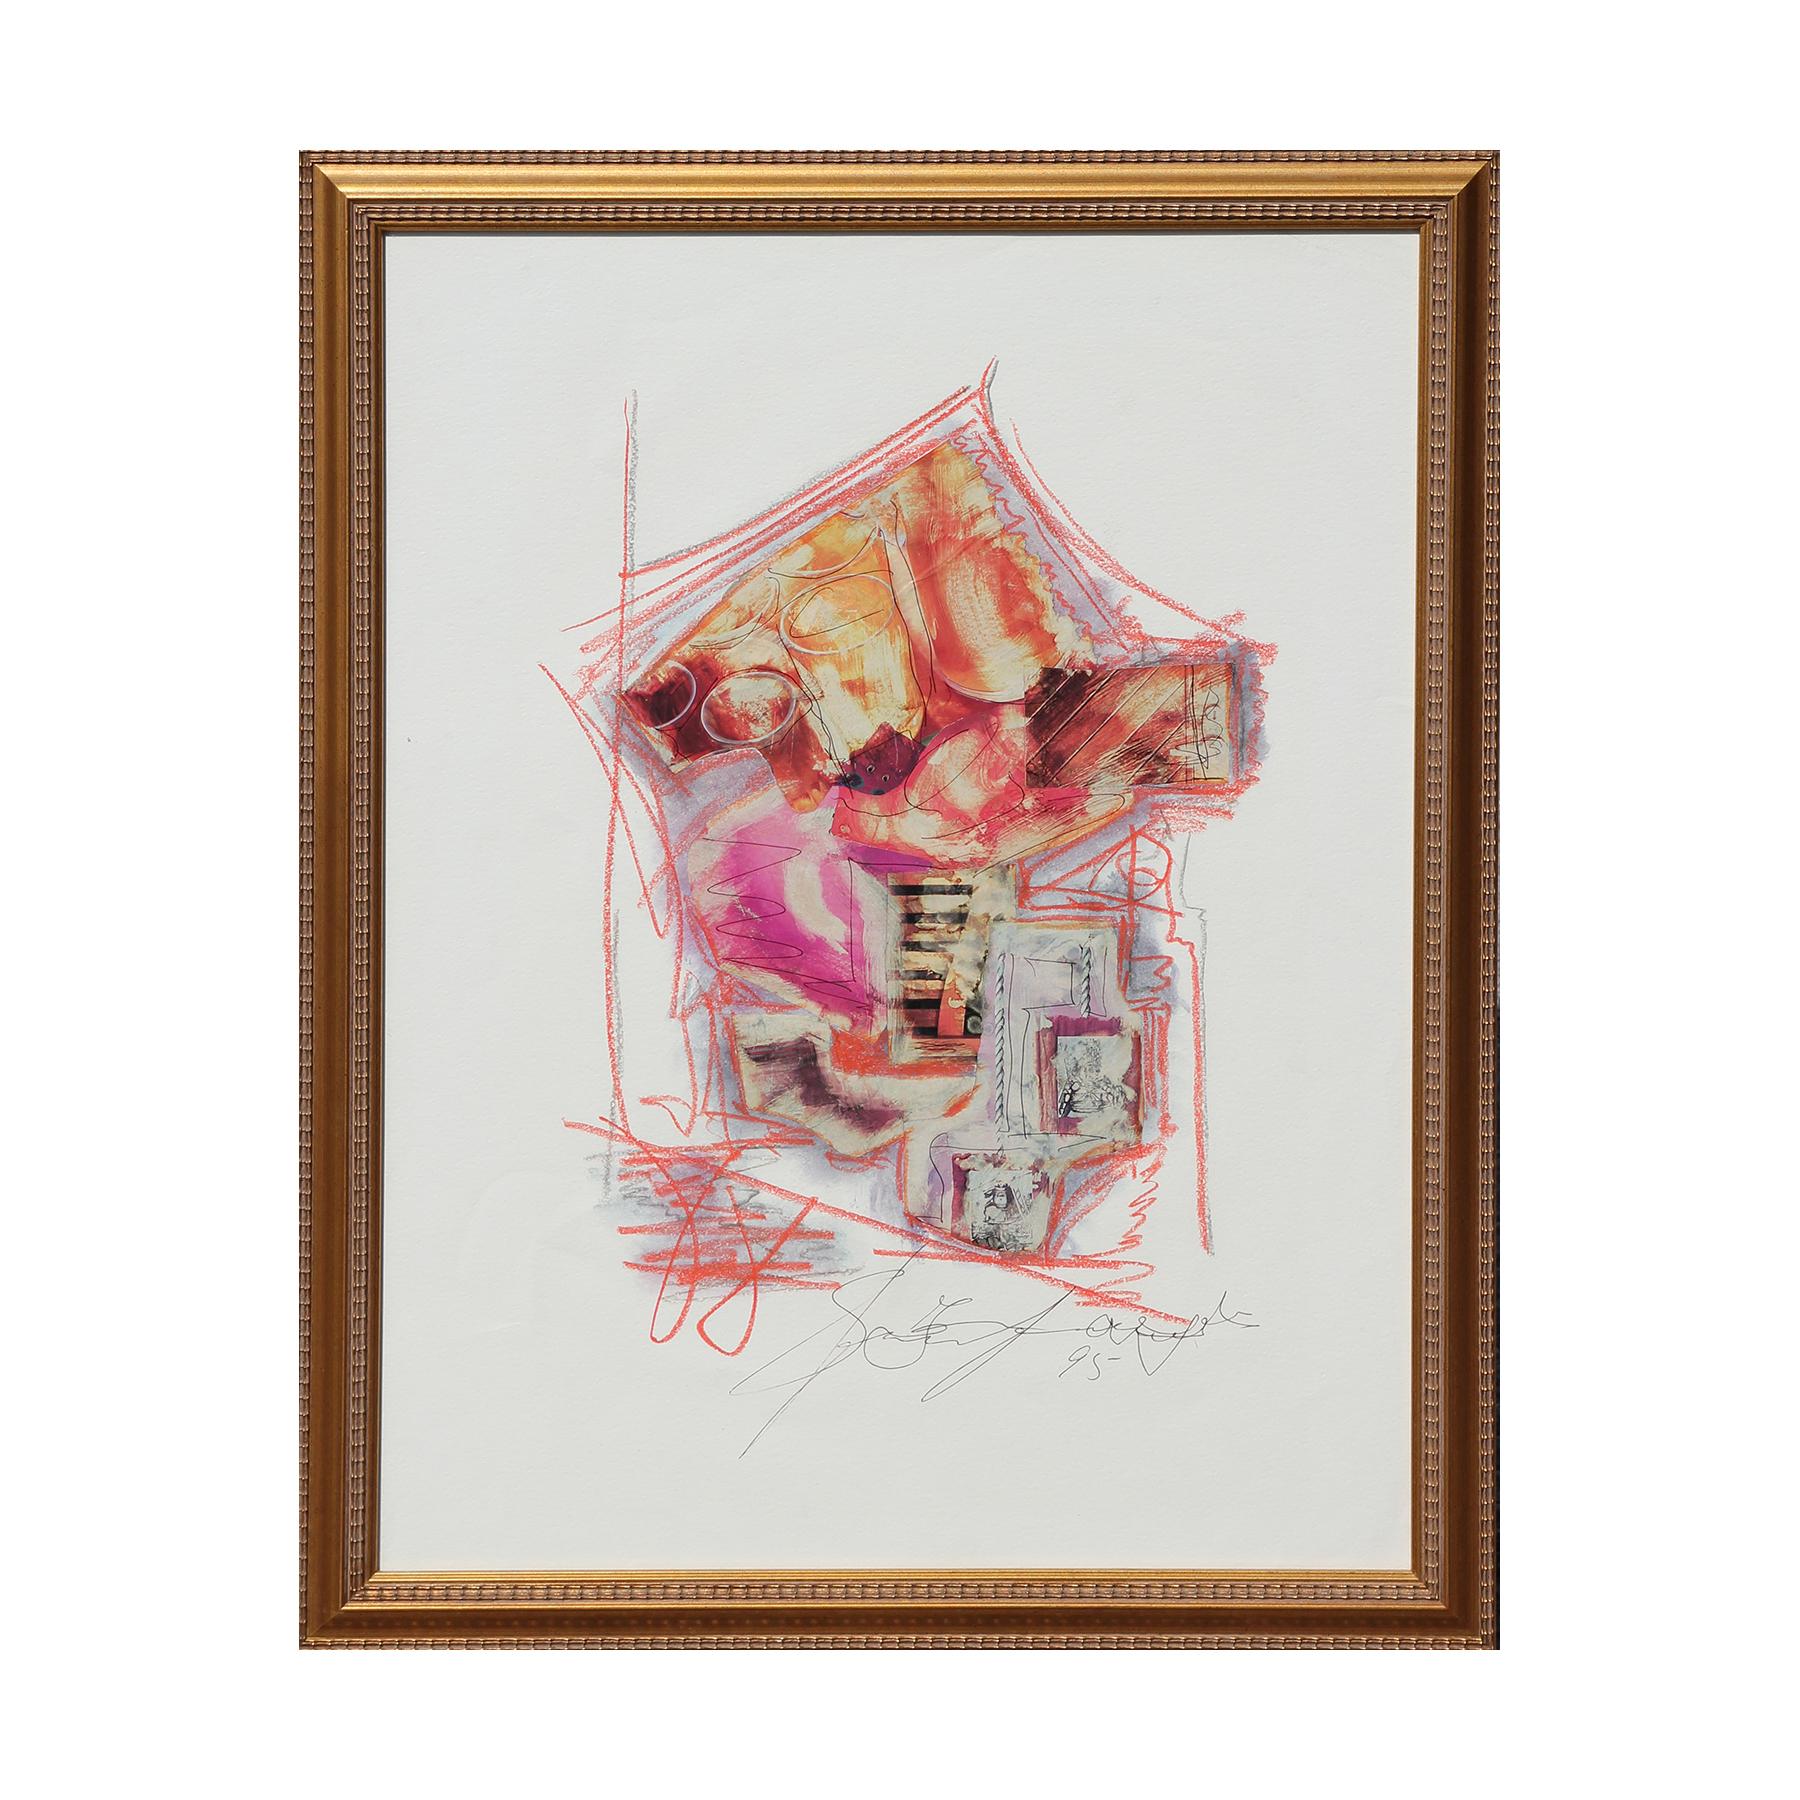 Unknown Landscape Art - Warm Toned Pink and Orange Mixed Media Abstract Landscape Scene of an Art Market